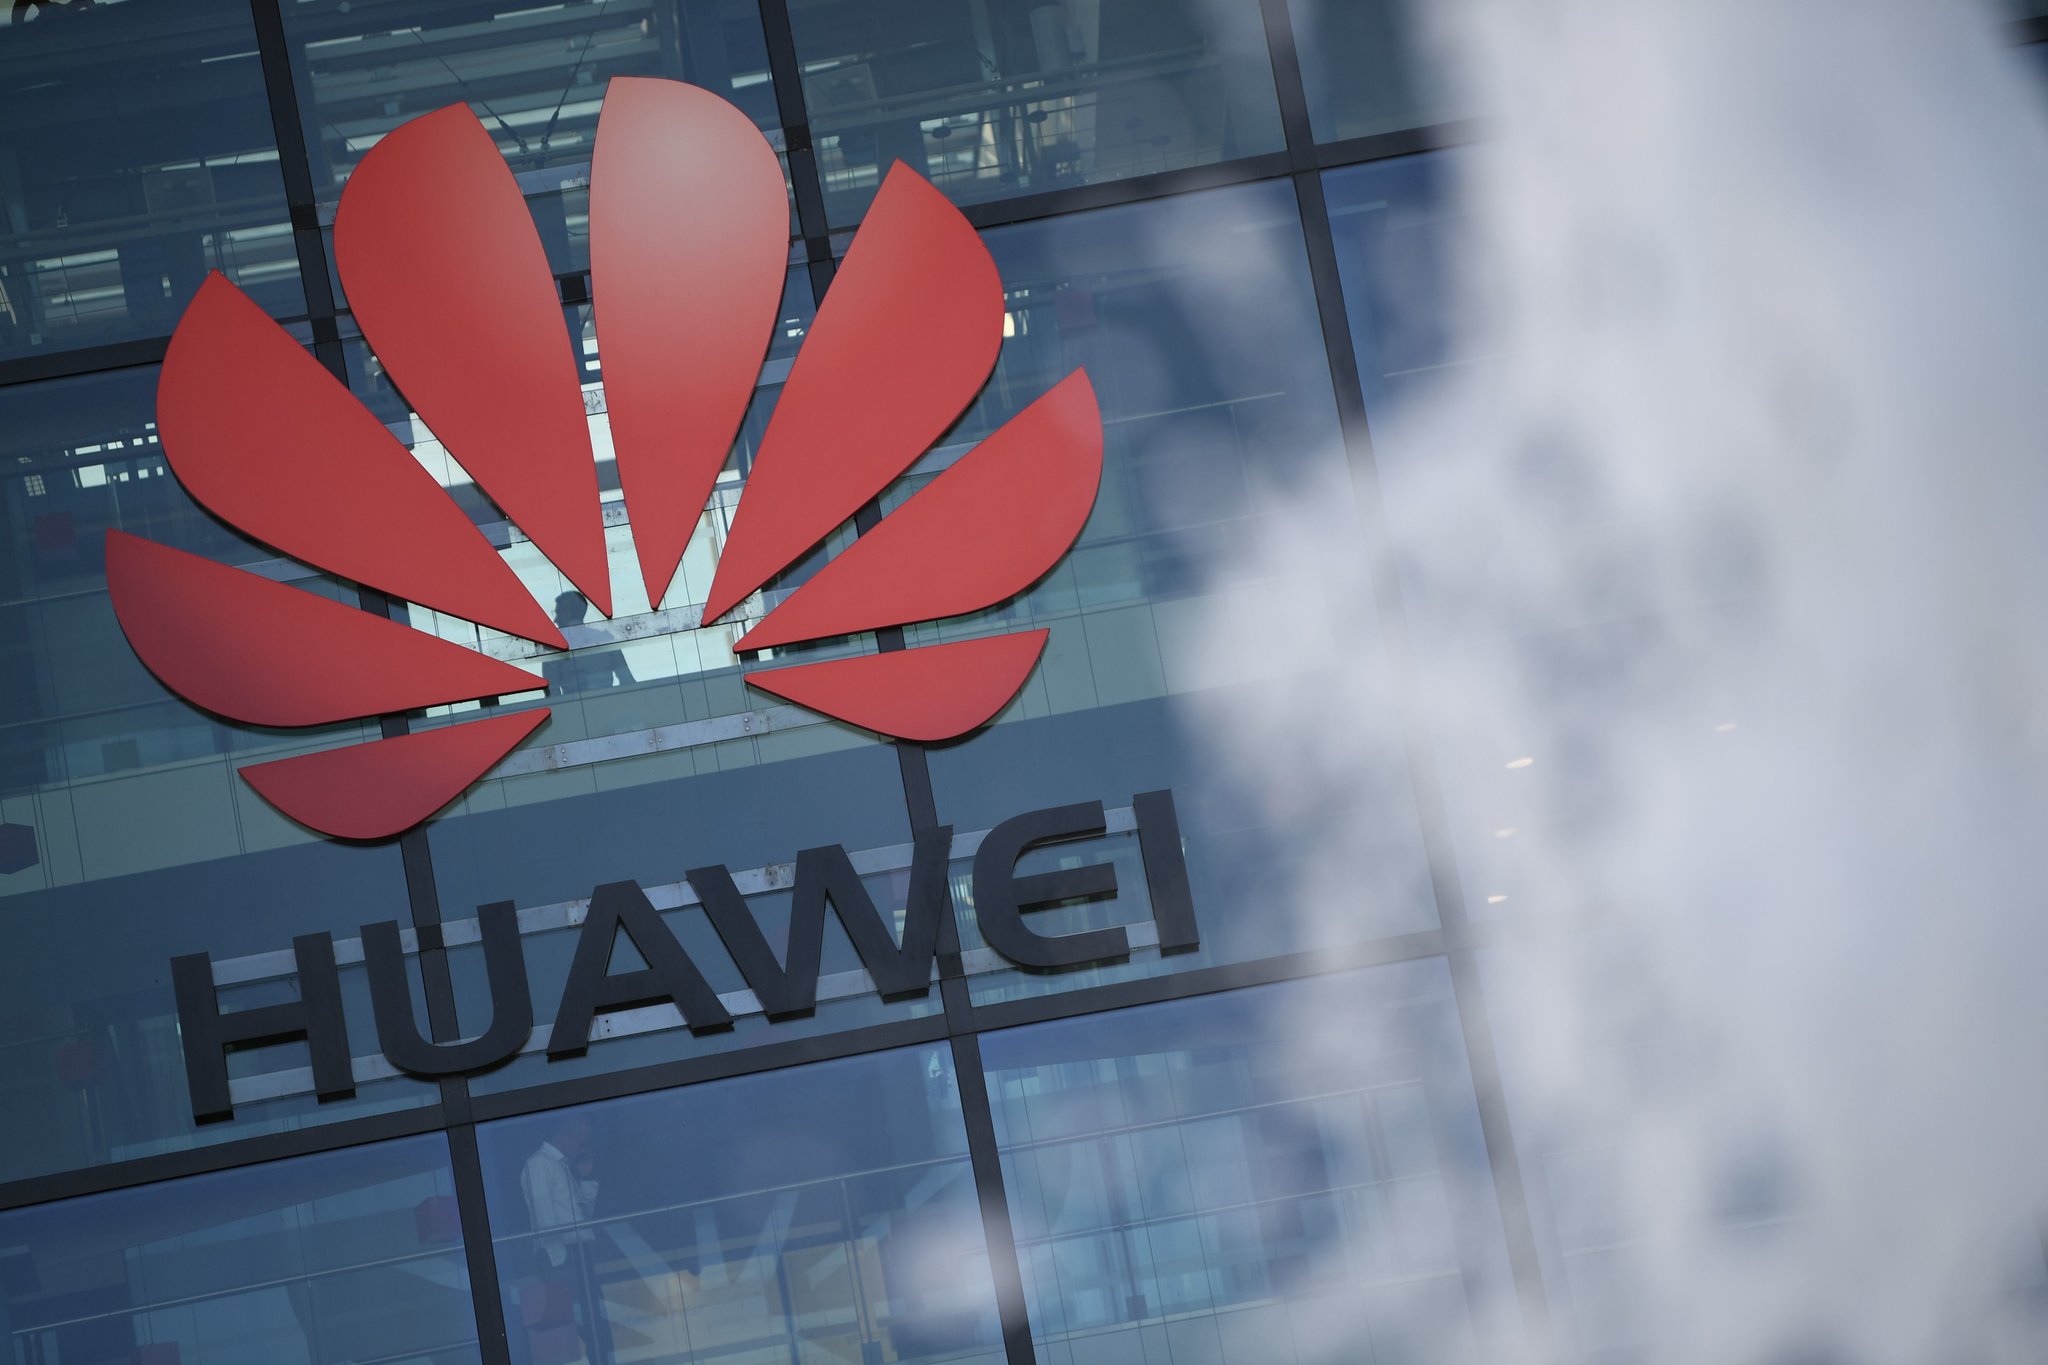 Reuters: documents show Huawei violated US sanctions against Iran